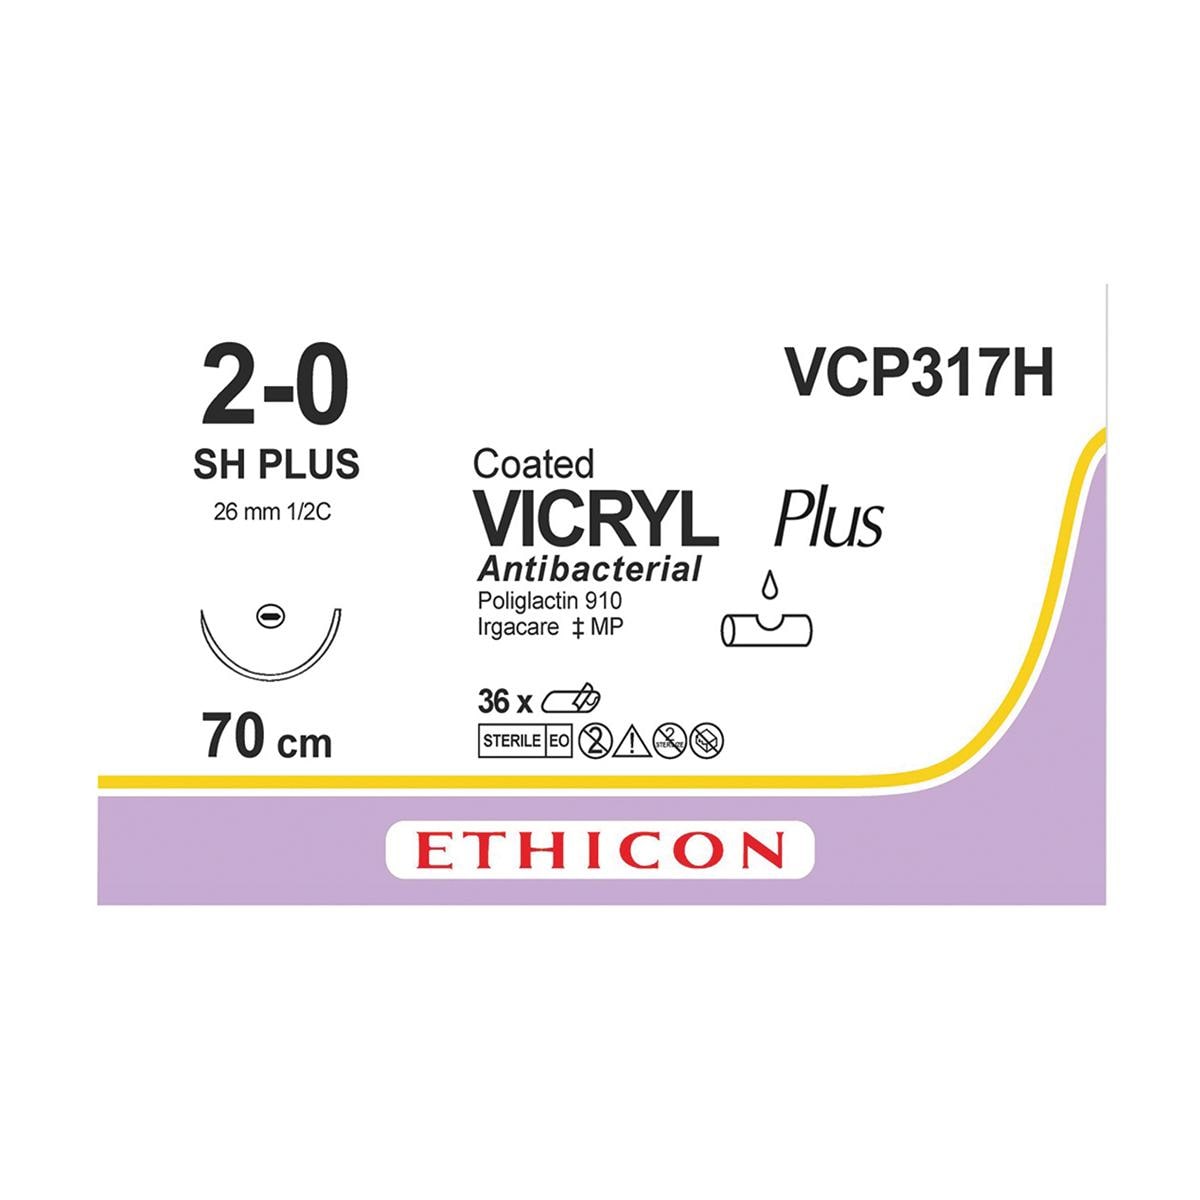 VICRYL Plus Sutures Violet Coated 70cm 2-0 1/2 Circle Taper Point Plus SH 26mm VCP317H 36pk